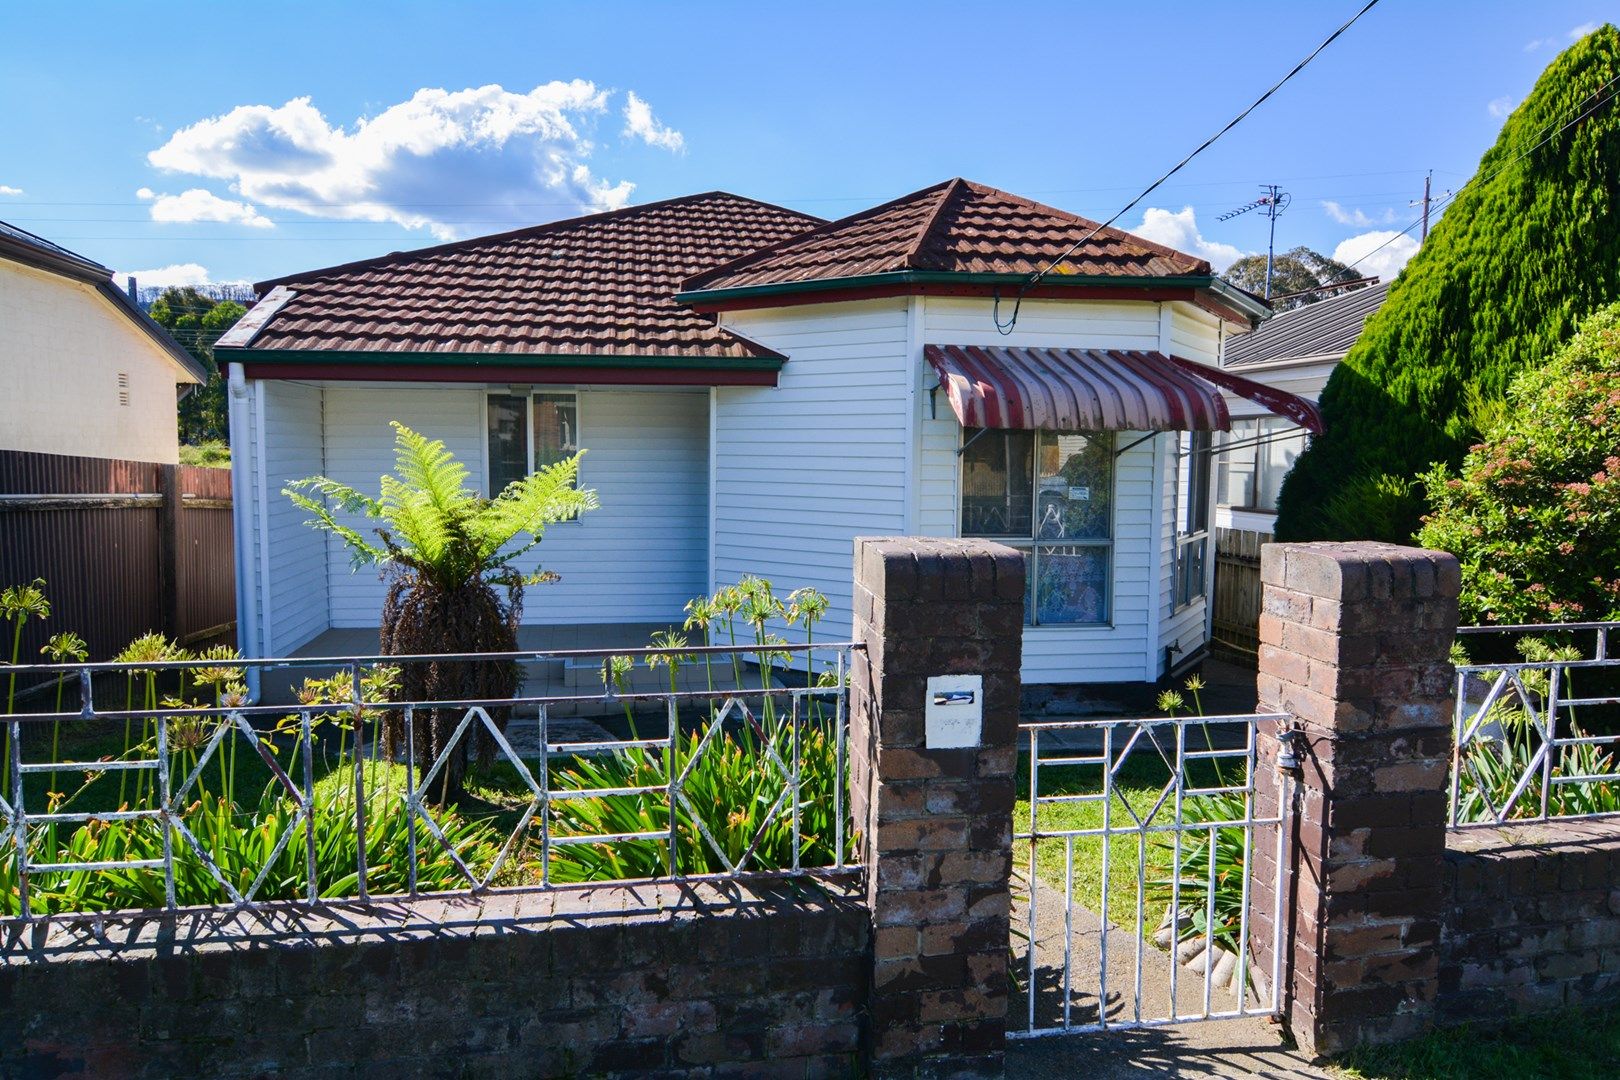 2 bedrooms House in 6 Chifley Road LITHGOW NSW, 2790